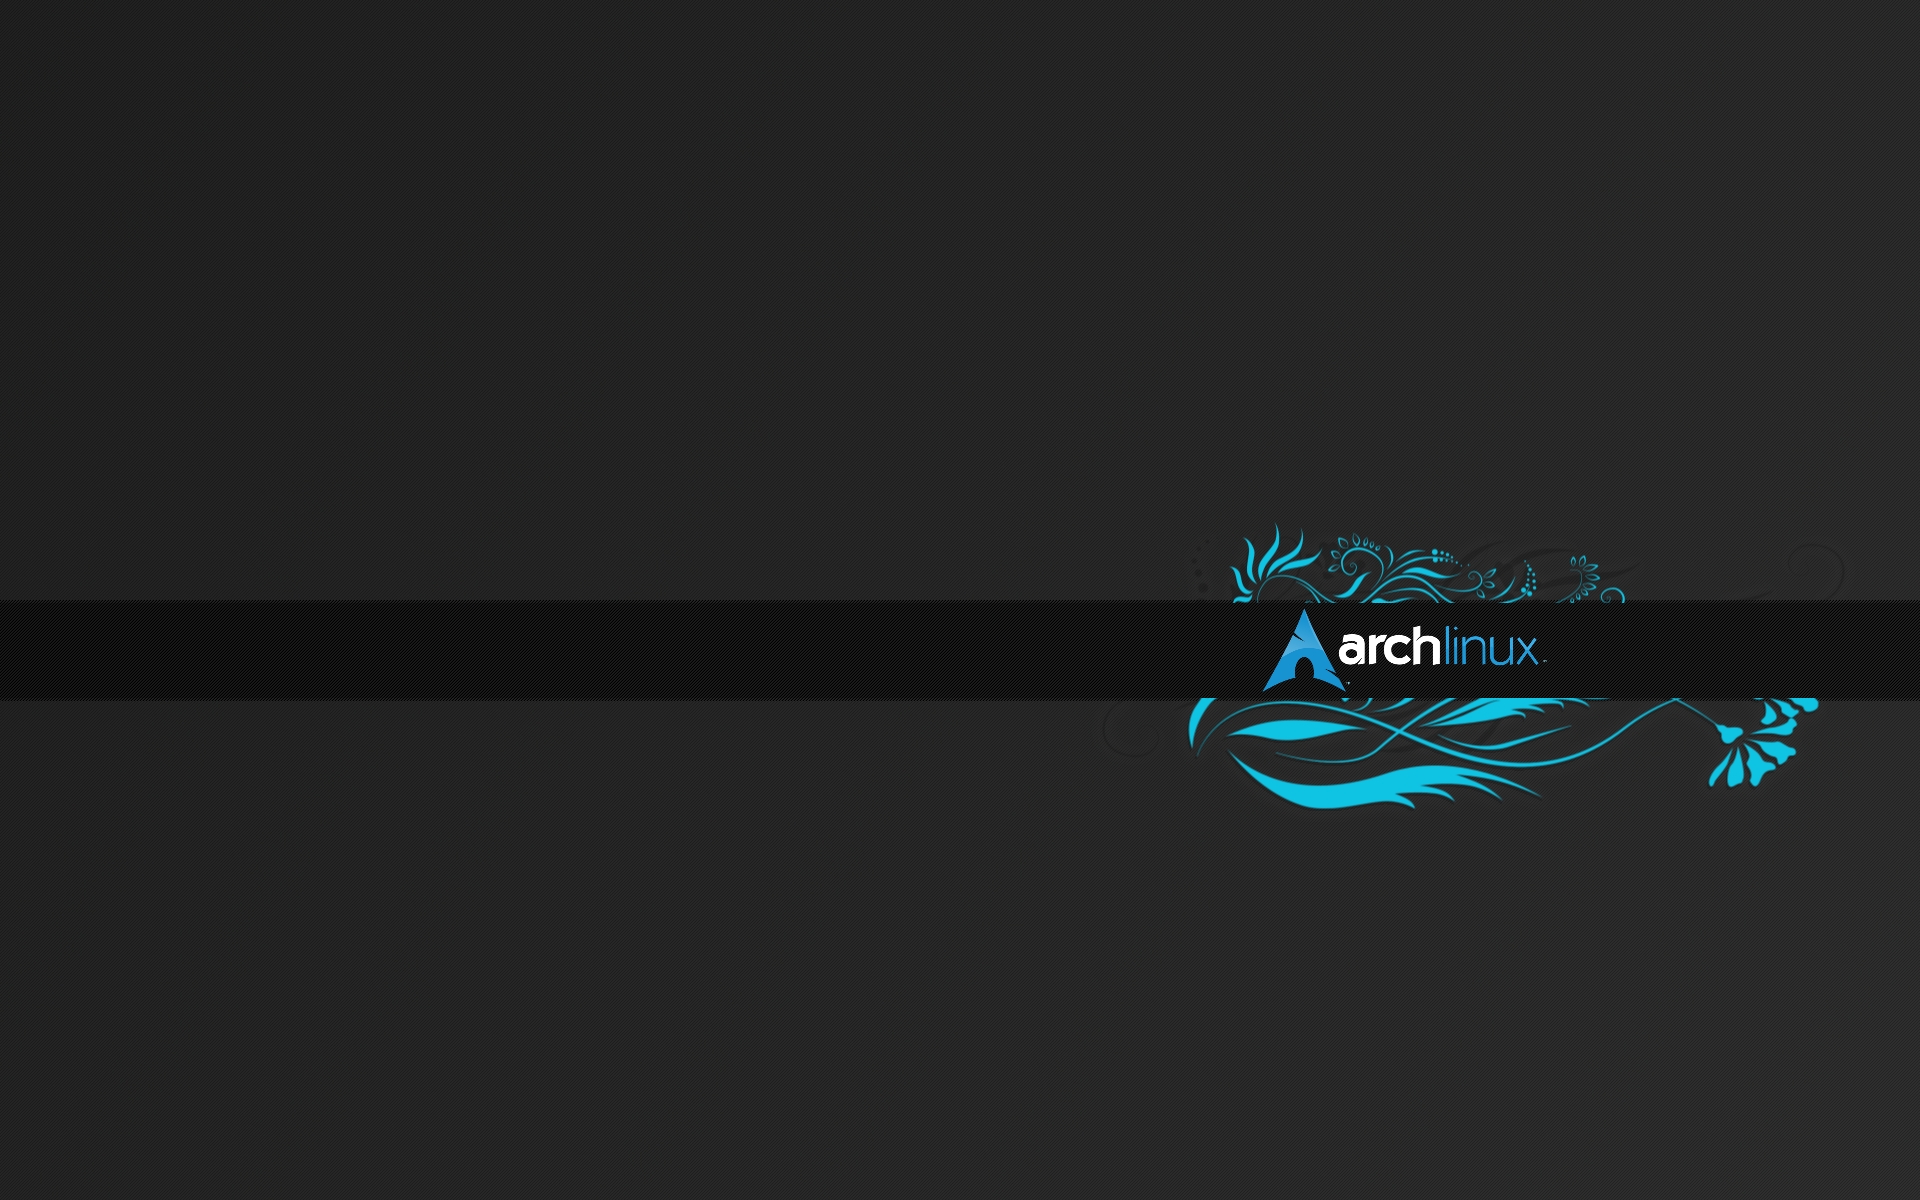 Arch Linux Wallpaper Images amp Pictures   Becuo